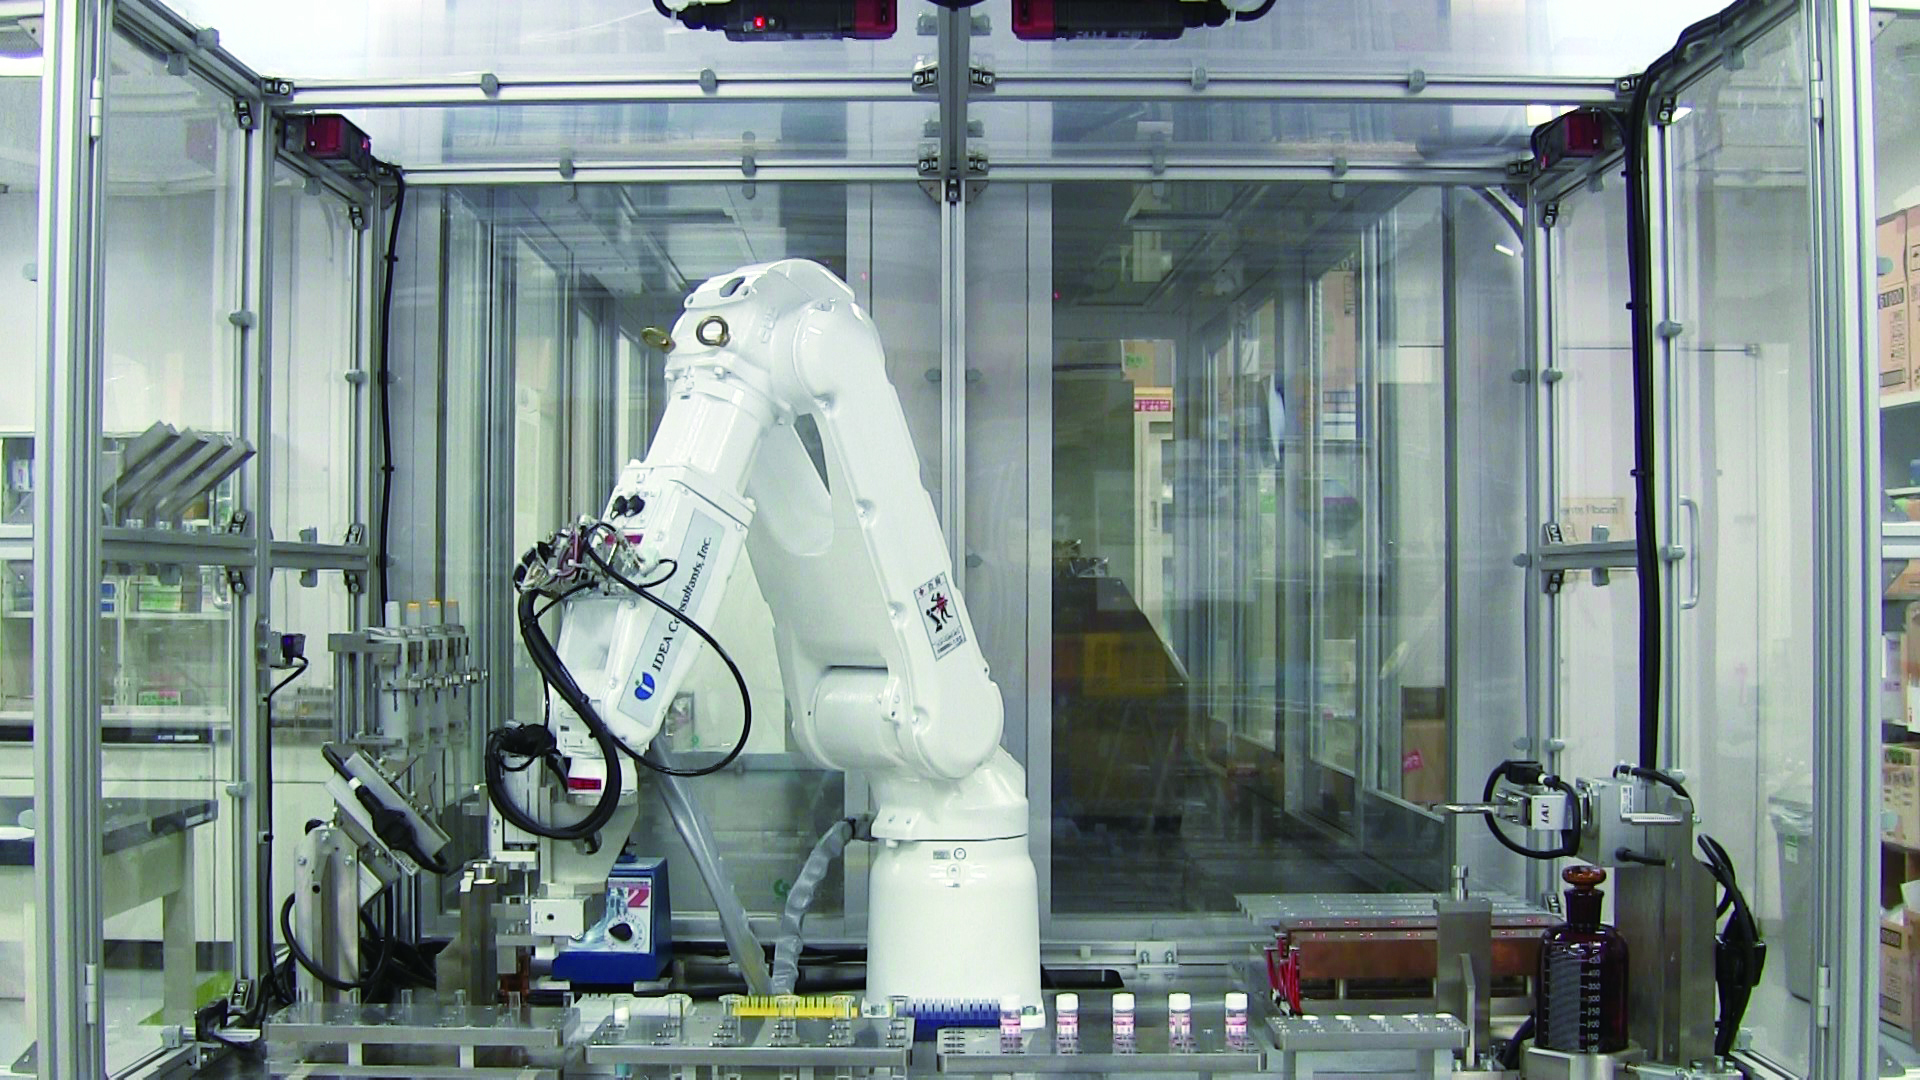 Pre-treatment robots for PCB analysis